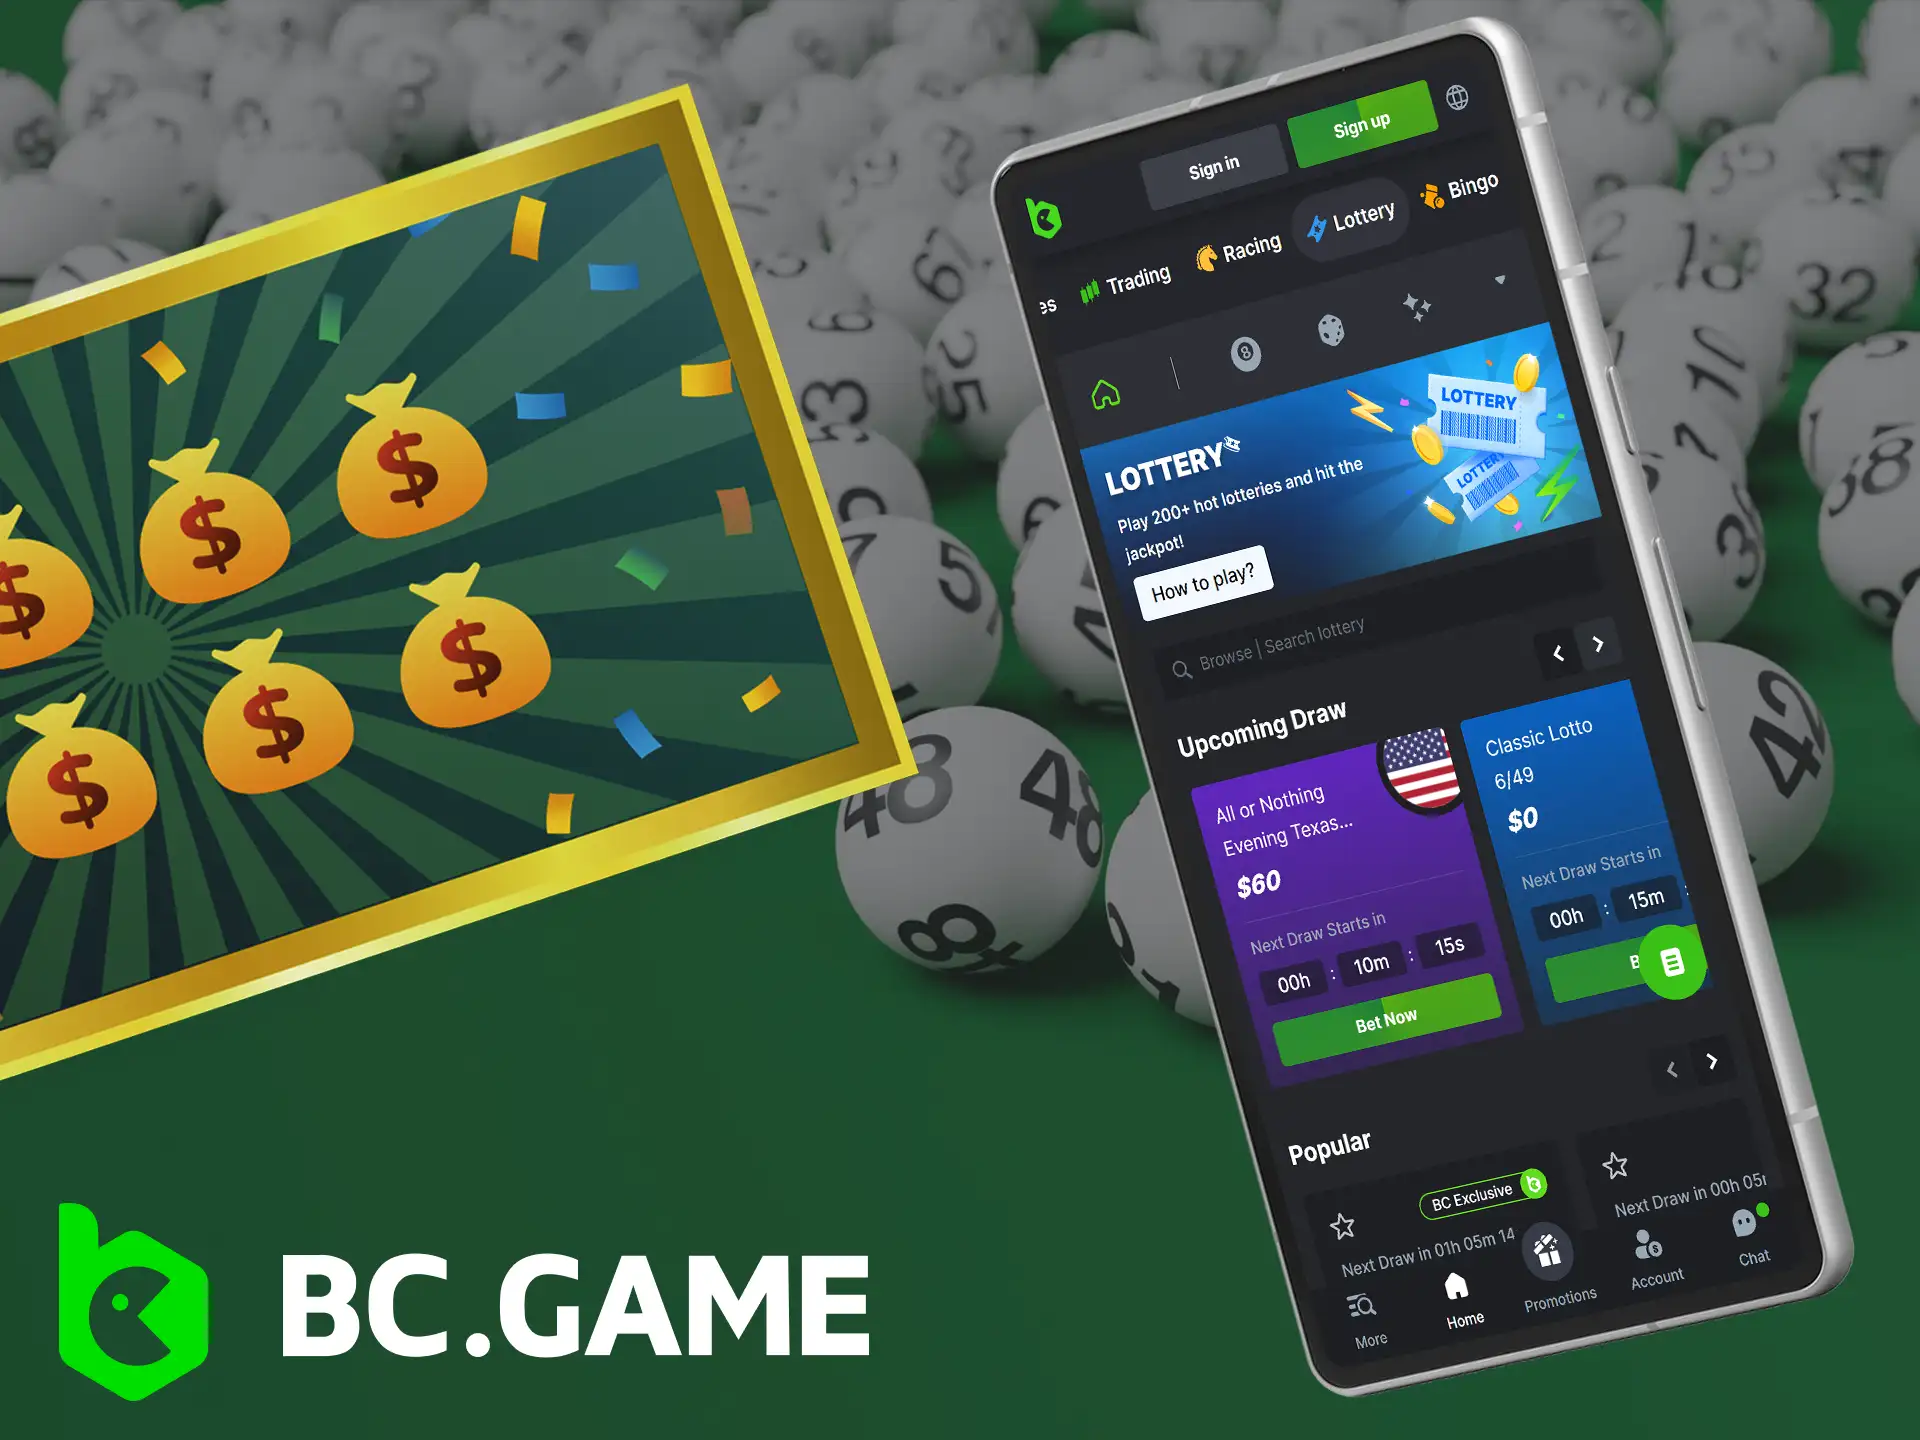 The BC.Game app lets you join exciting lotteries.